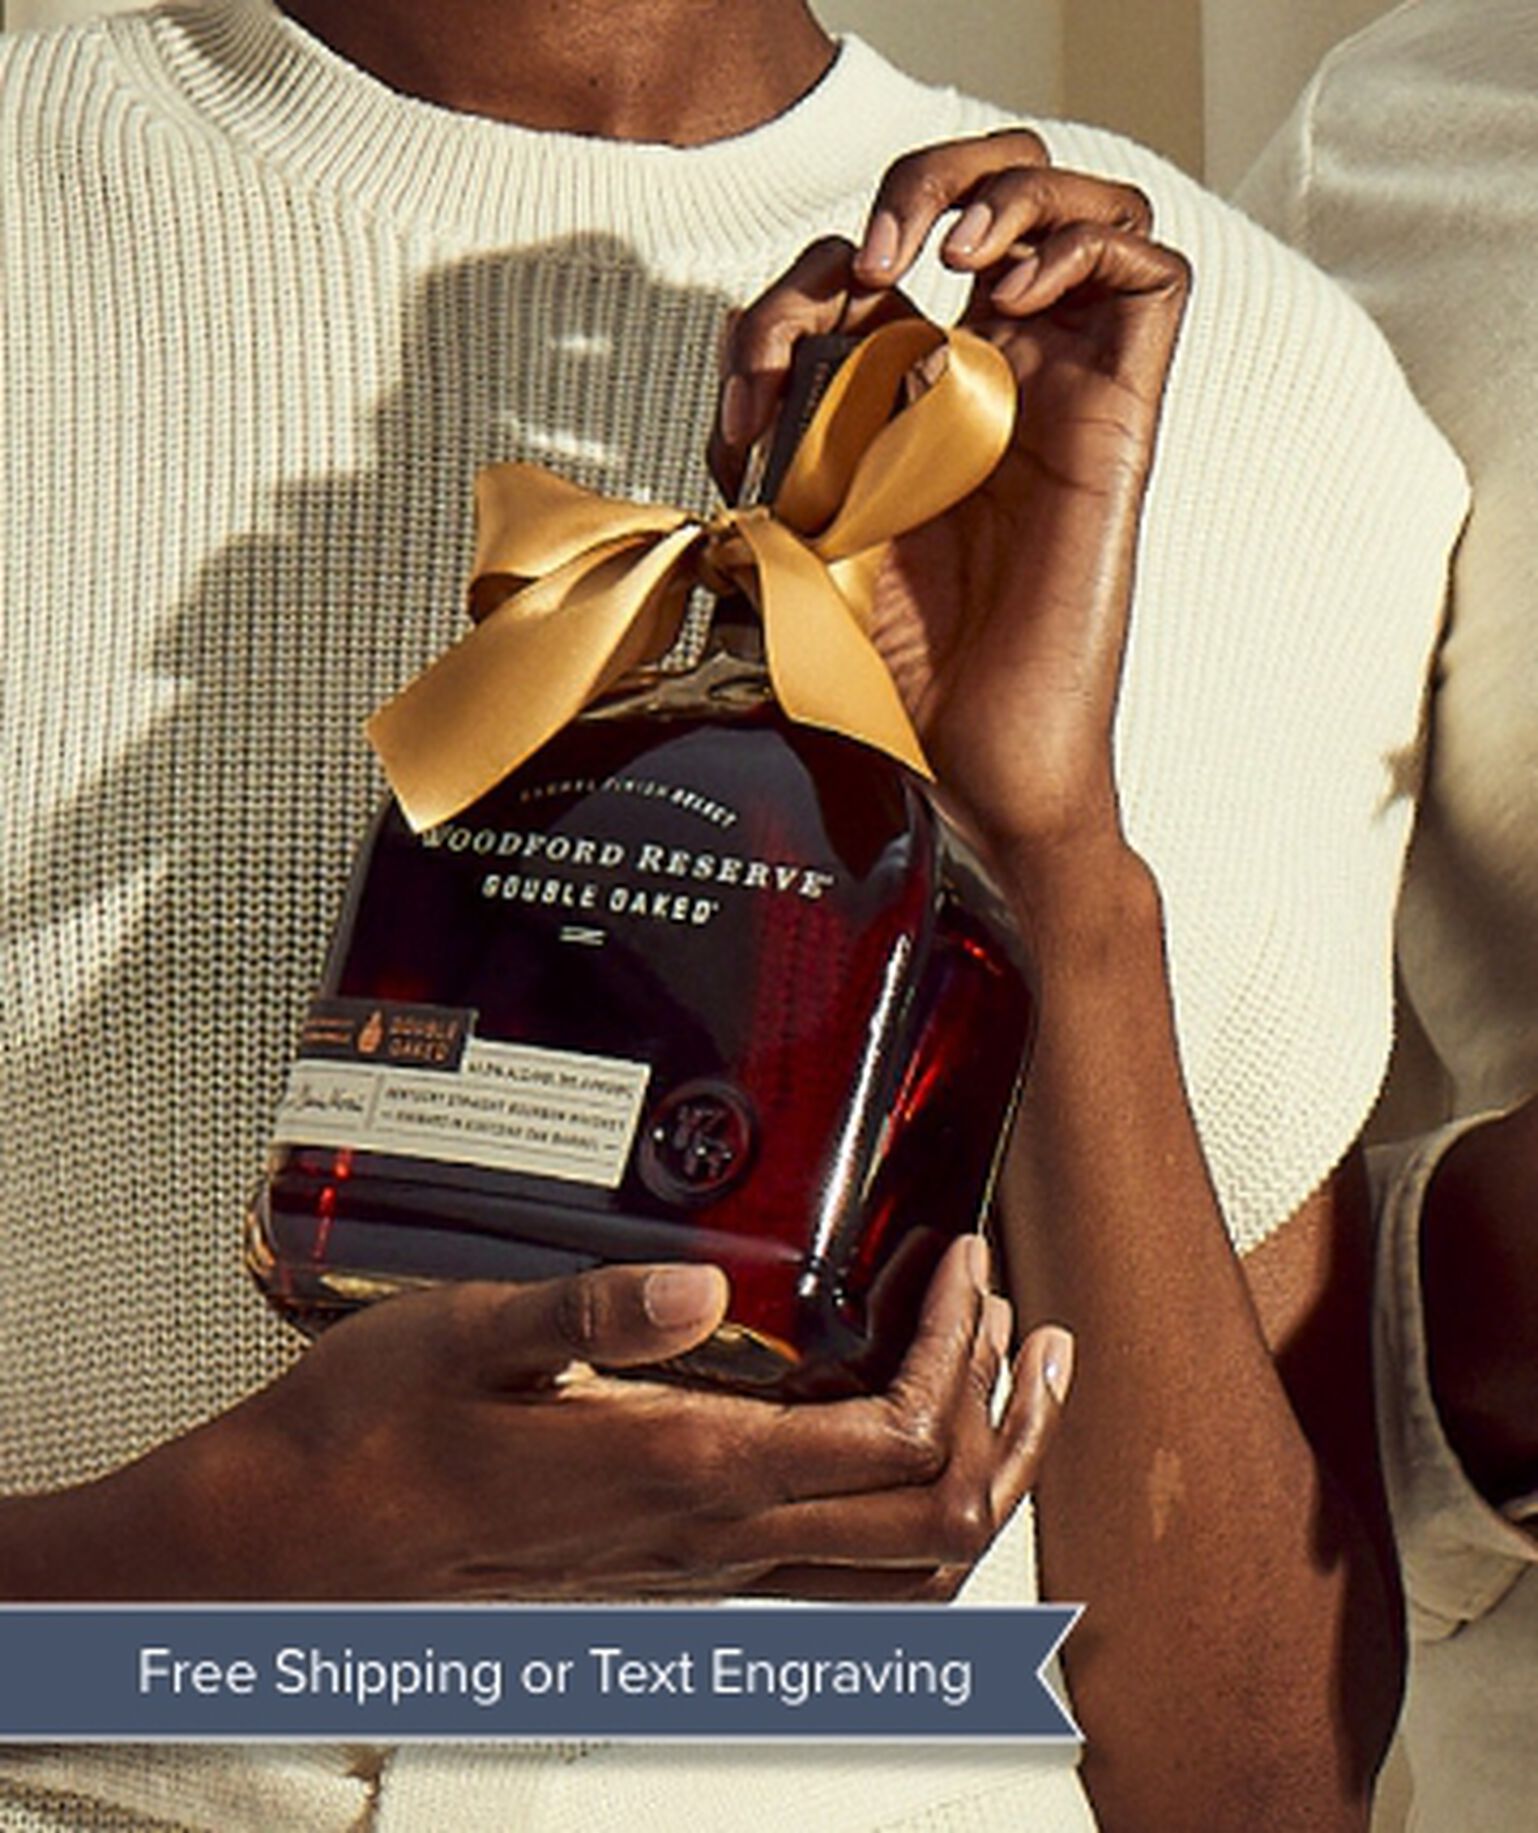 Two Woodford Reserve bottles with gold ribbons being held